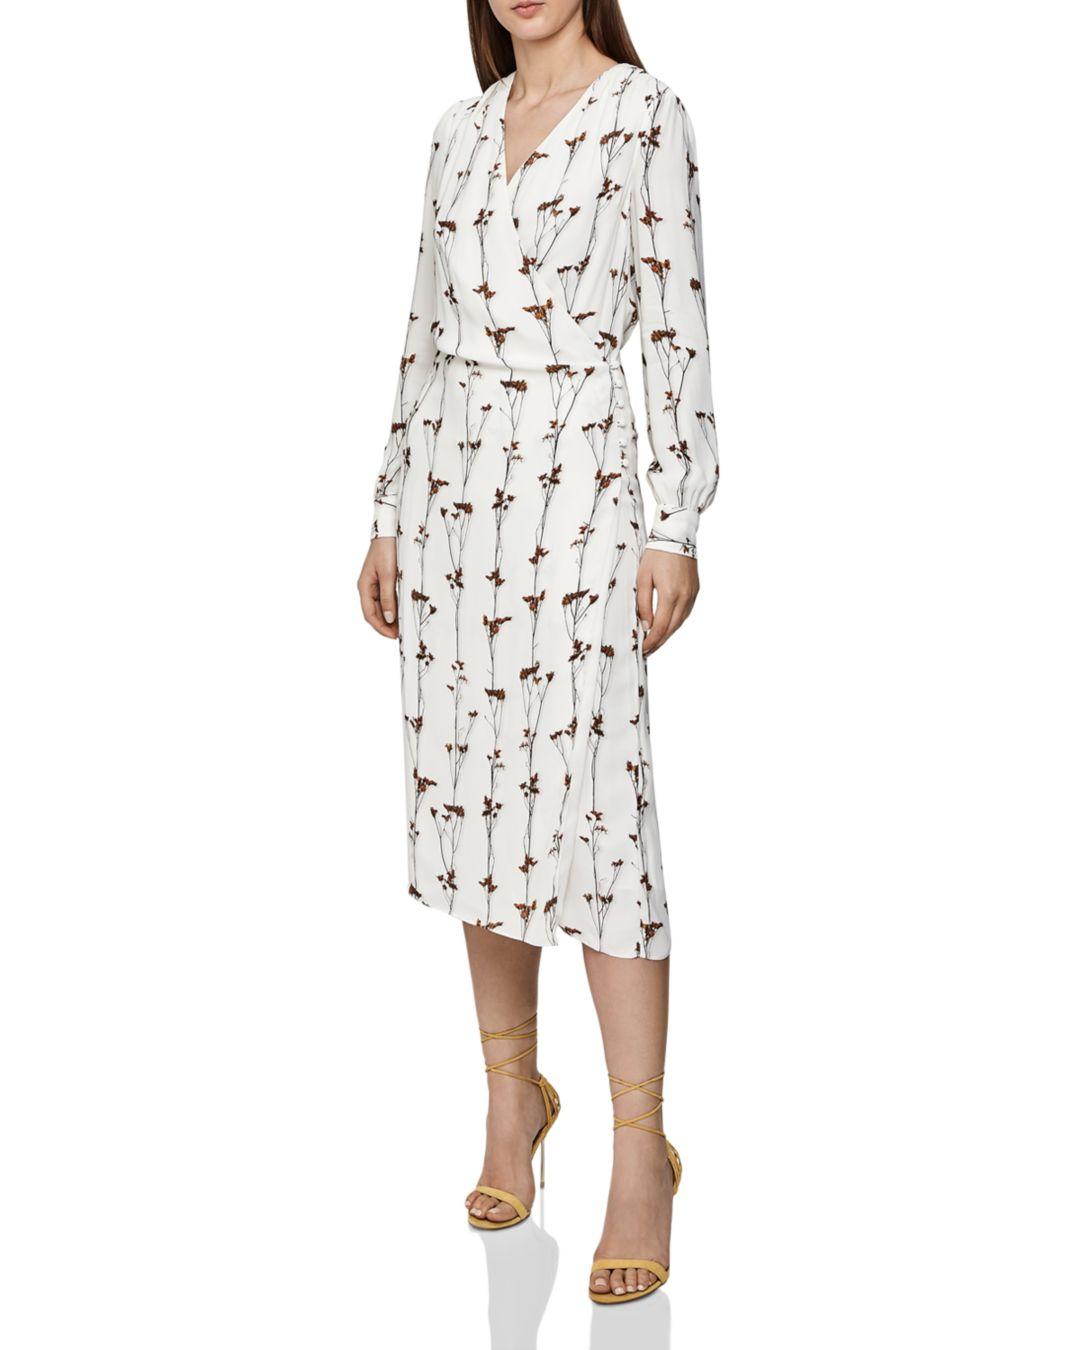 Reiss Synthetic Floral Printed Wrap Dress in Ivory (White) - Save 29% ...